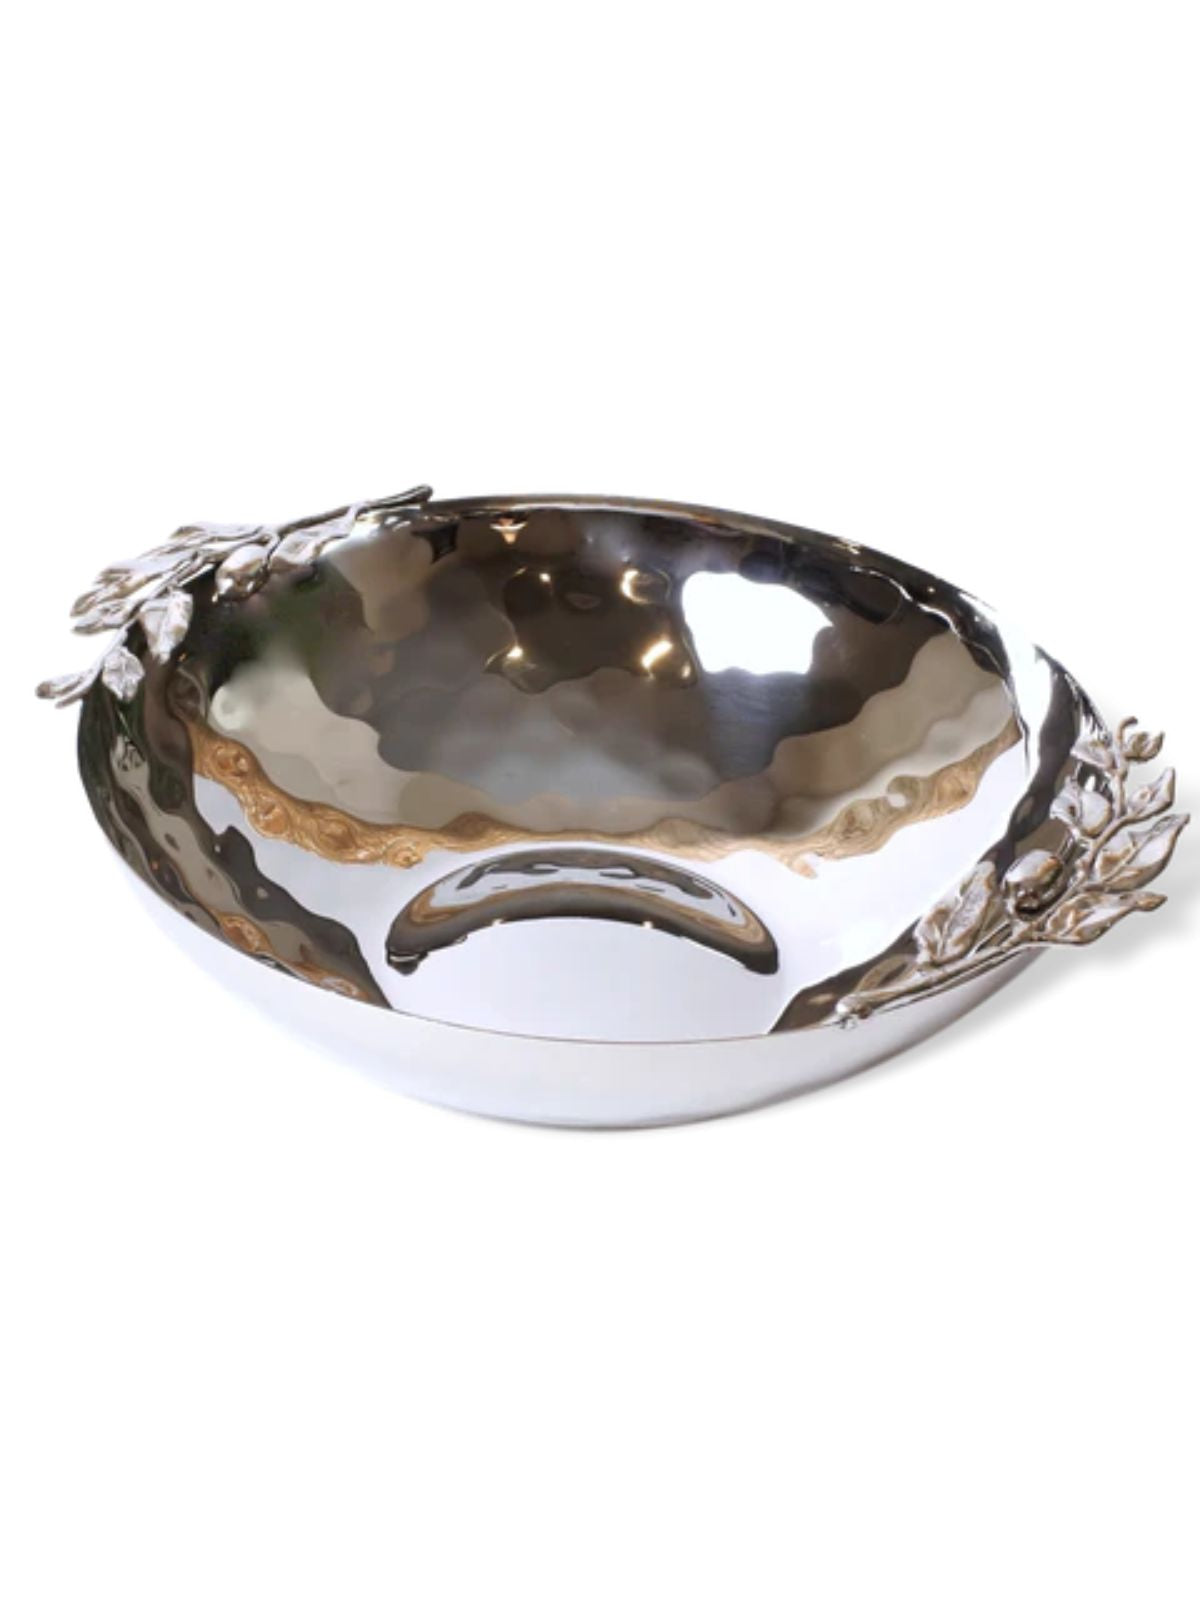 14D inch Stainless Steel Serving Bowl Features hammered textures with olive designs on the edges, Sold by KYA Home Decor.